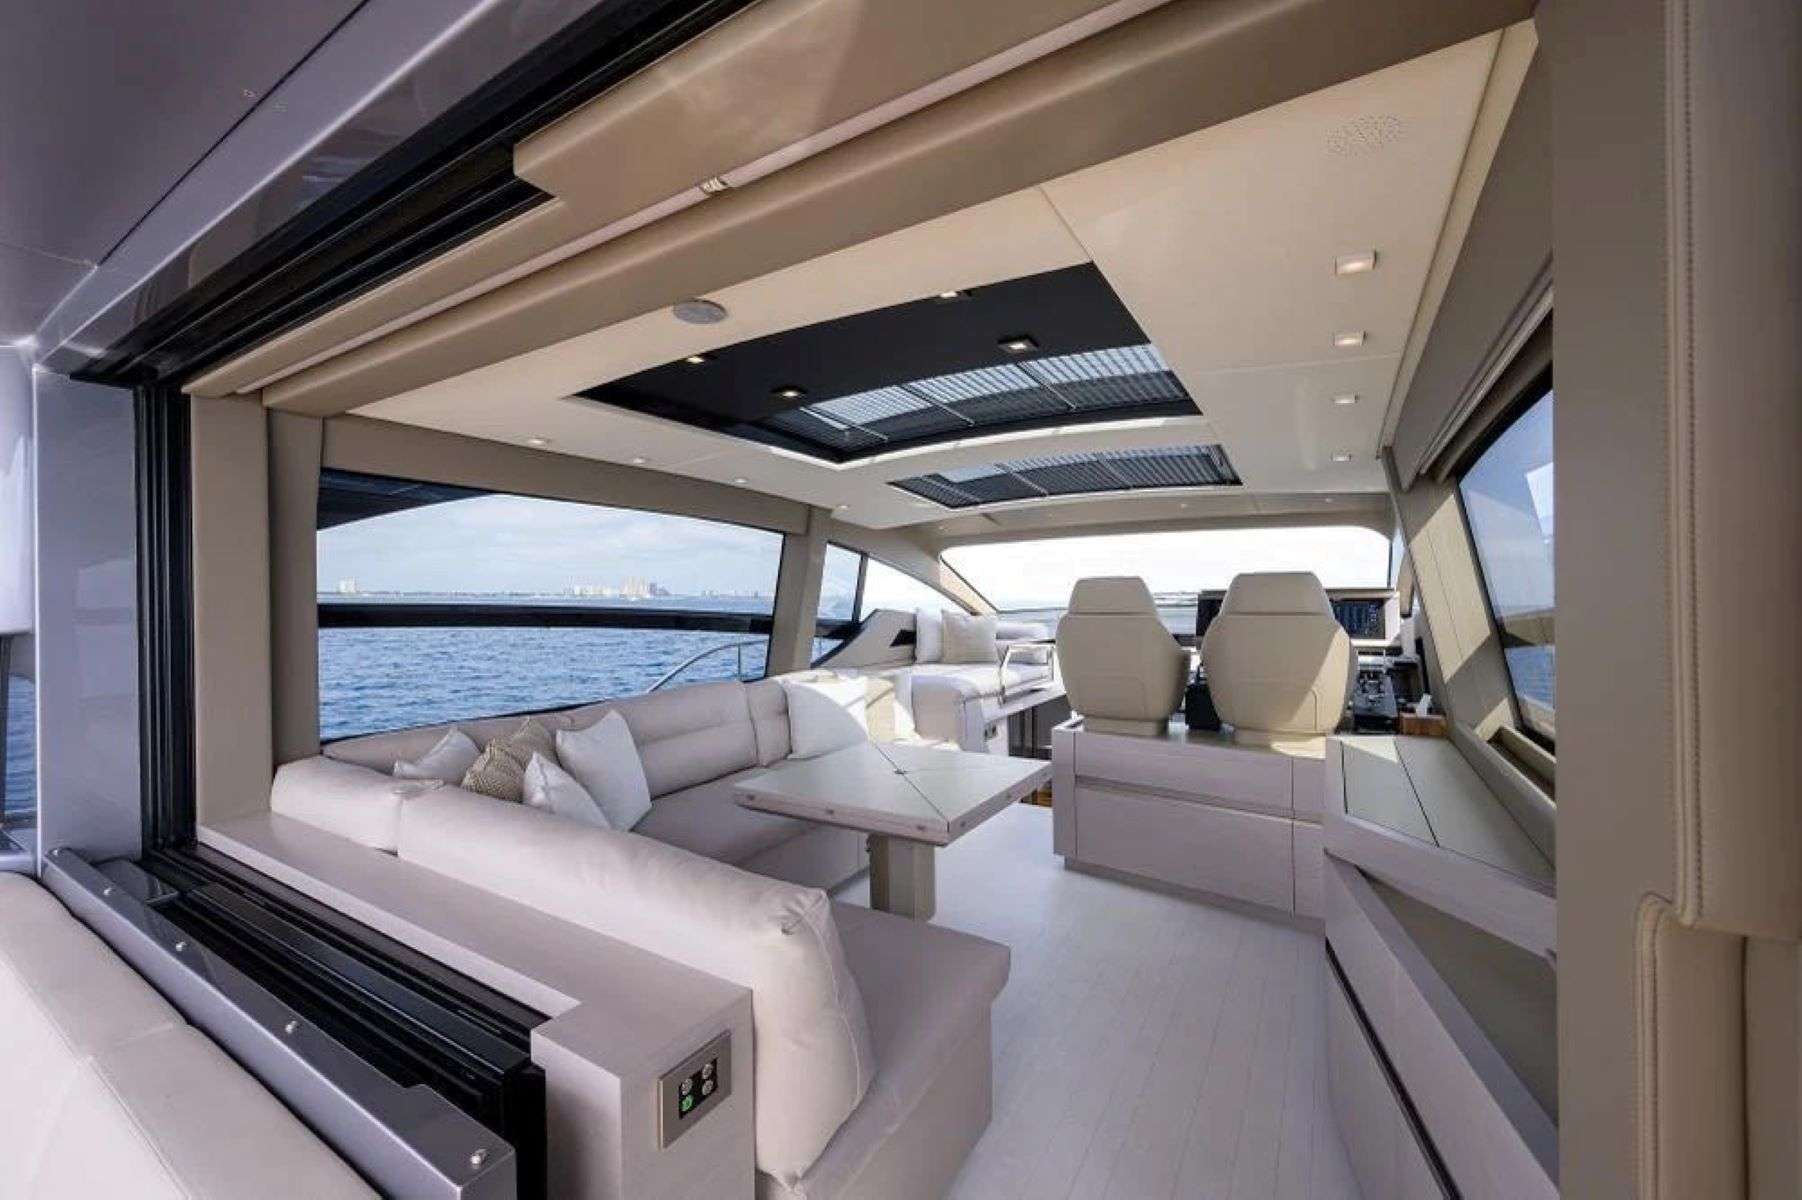 Amici - Yacht Charter Miami & Boat hire in Summer: USA - New England | Winter: USA - Florida East Coast 2